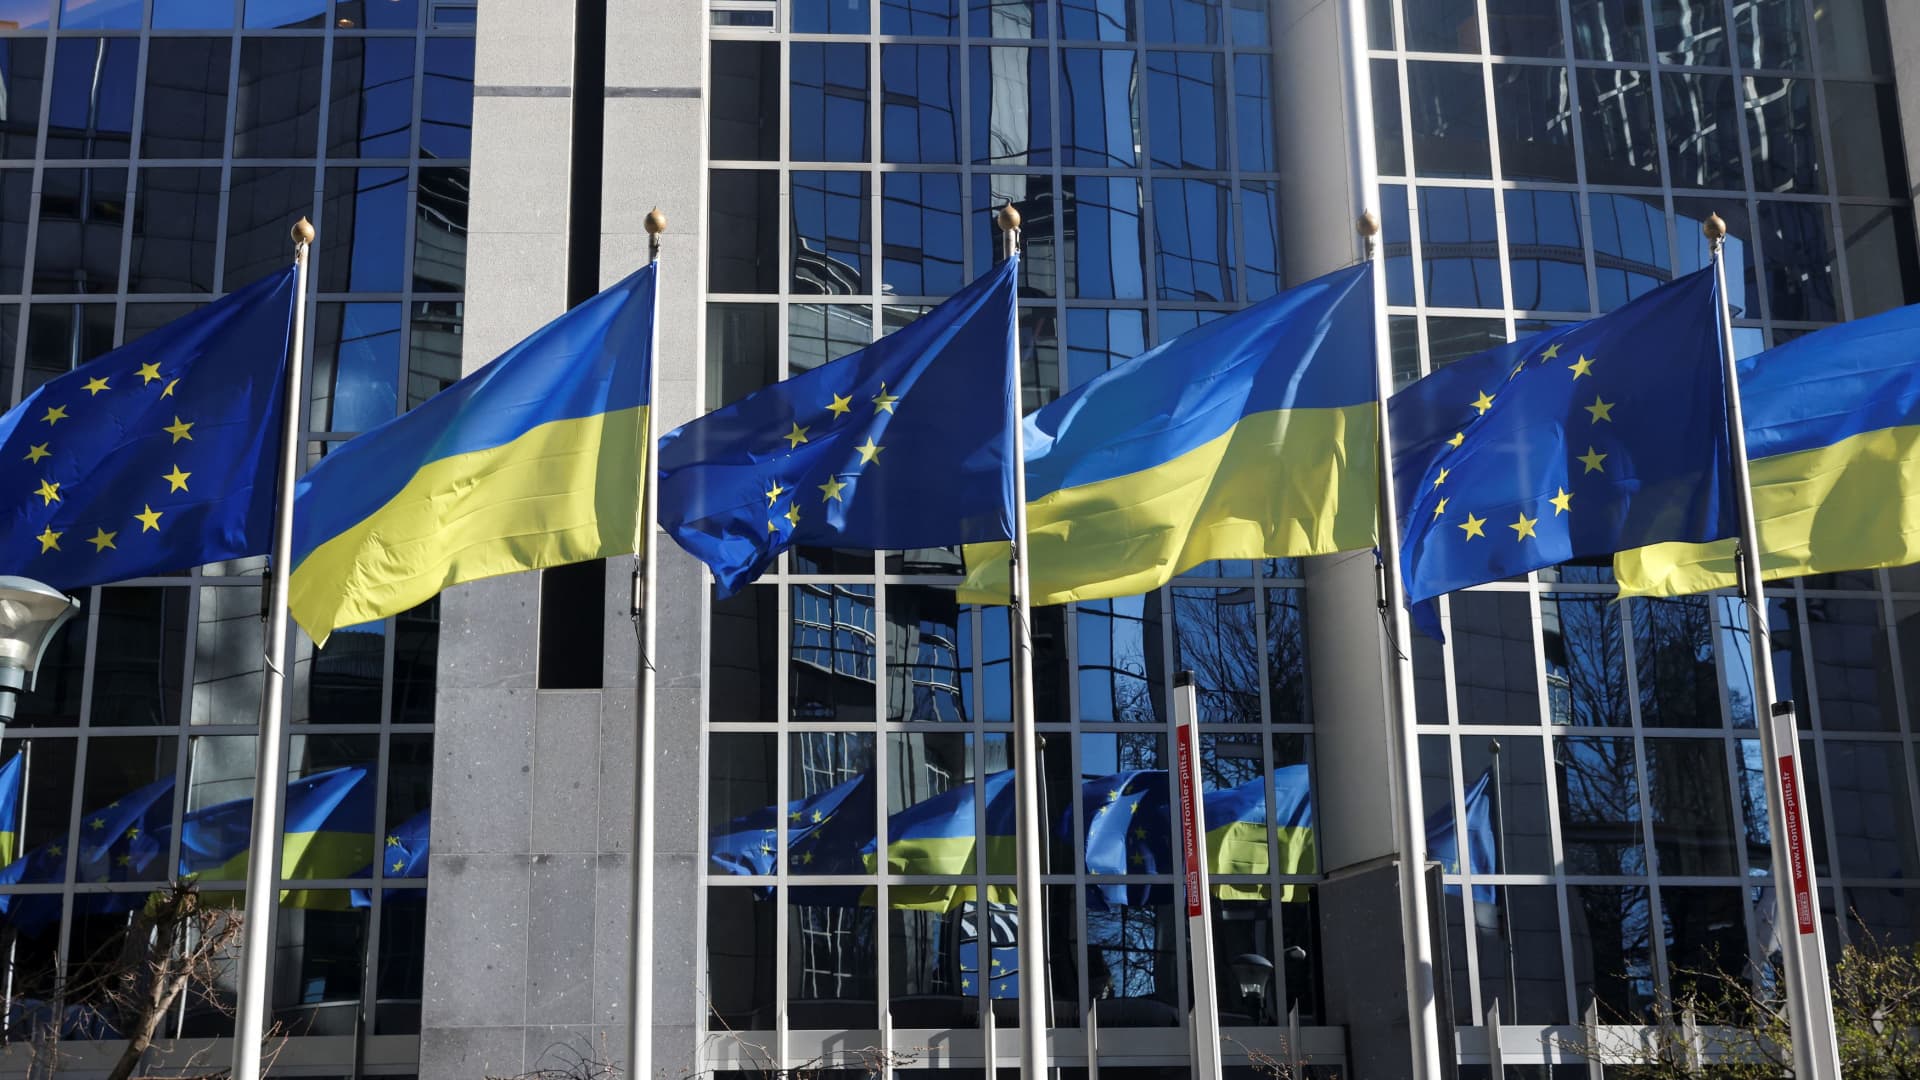 Flags of European Union and Ukraine flutter outside EU Parliament building, in Brussels, Belgium, February 28, 2022.